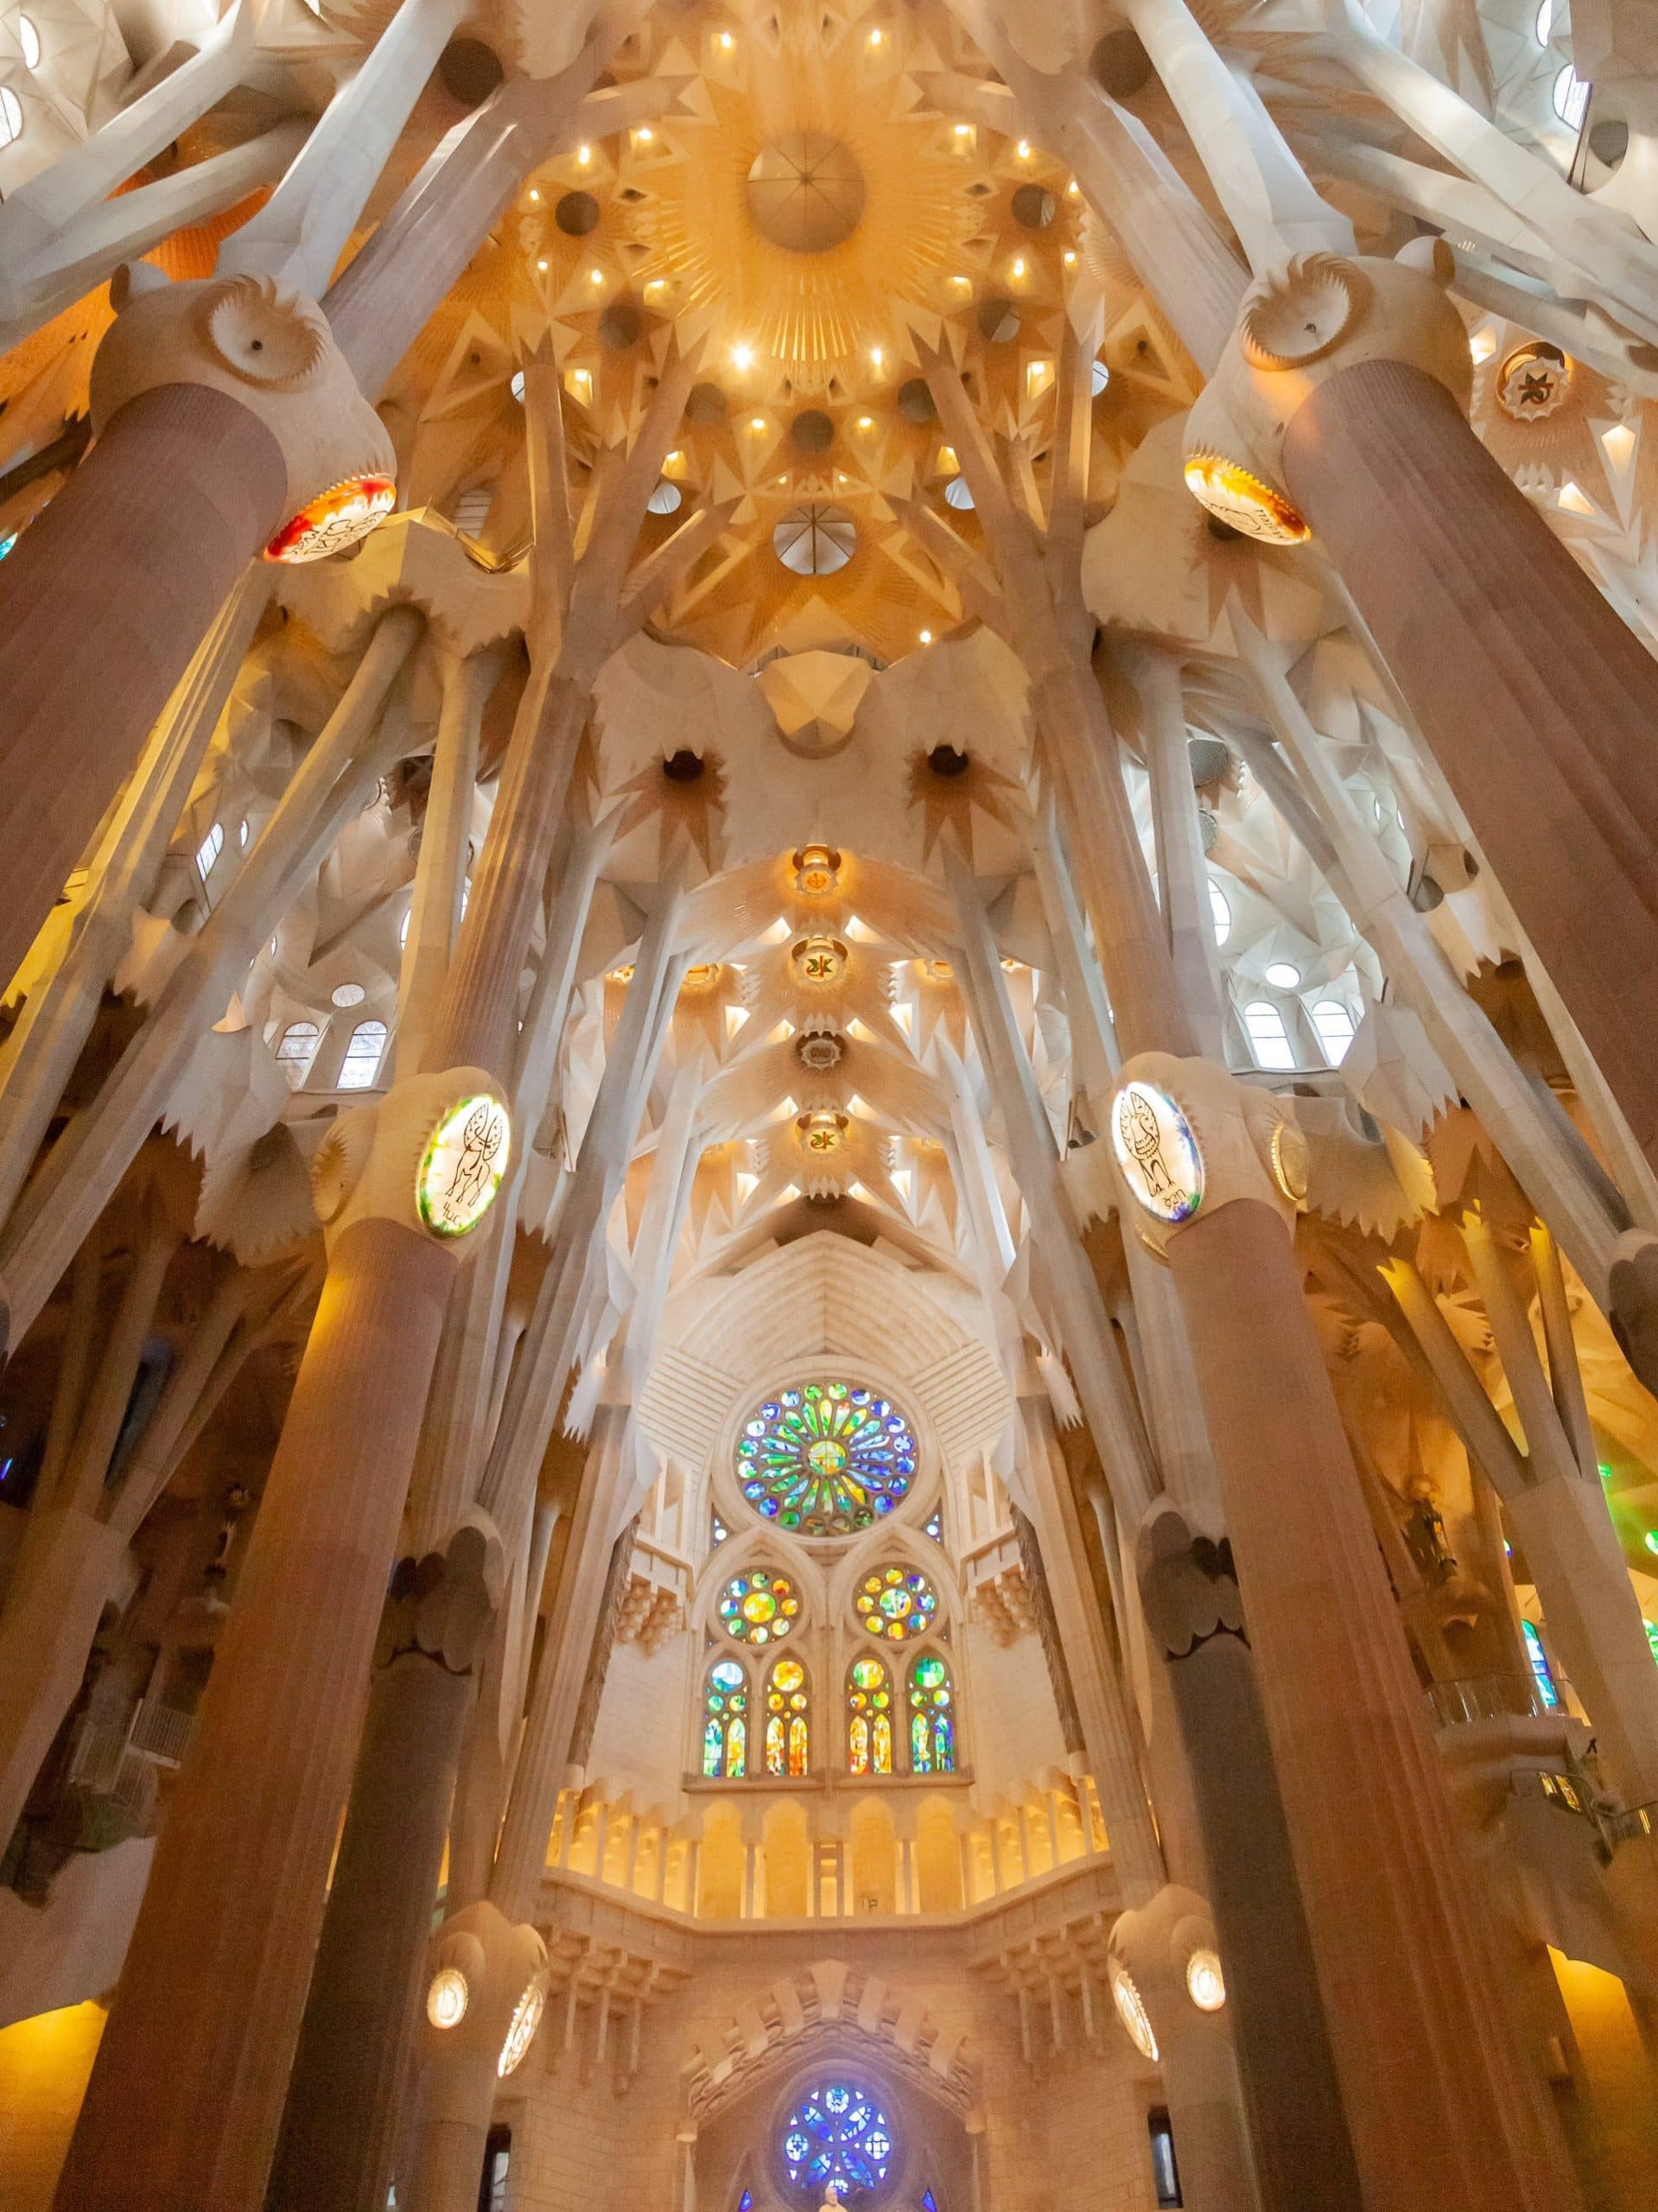 The Sagrada Família is the number one must-see attraction in Barcelona for first-time travelers